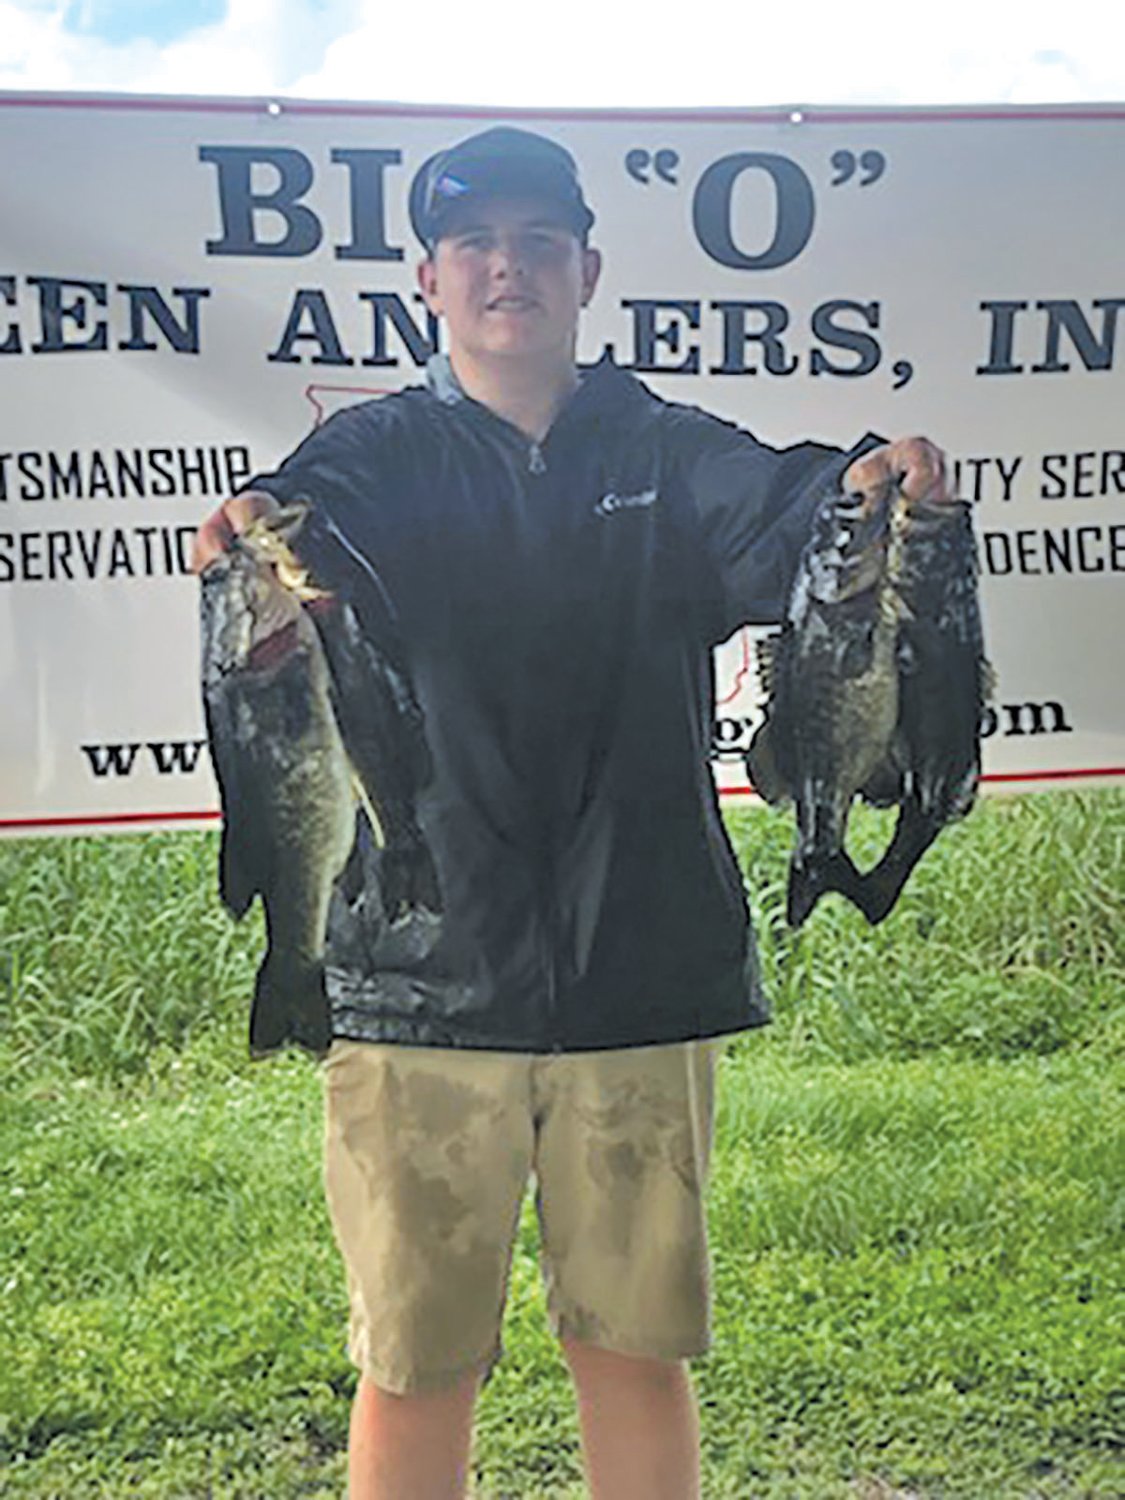 Tanner Seabolt took first place with a total of 14.99 lbs.